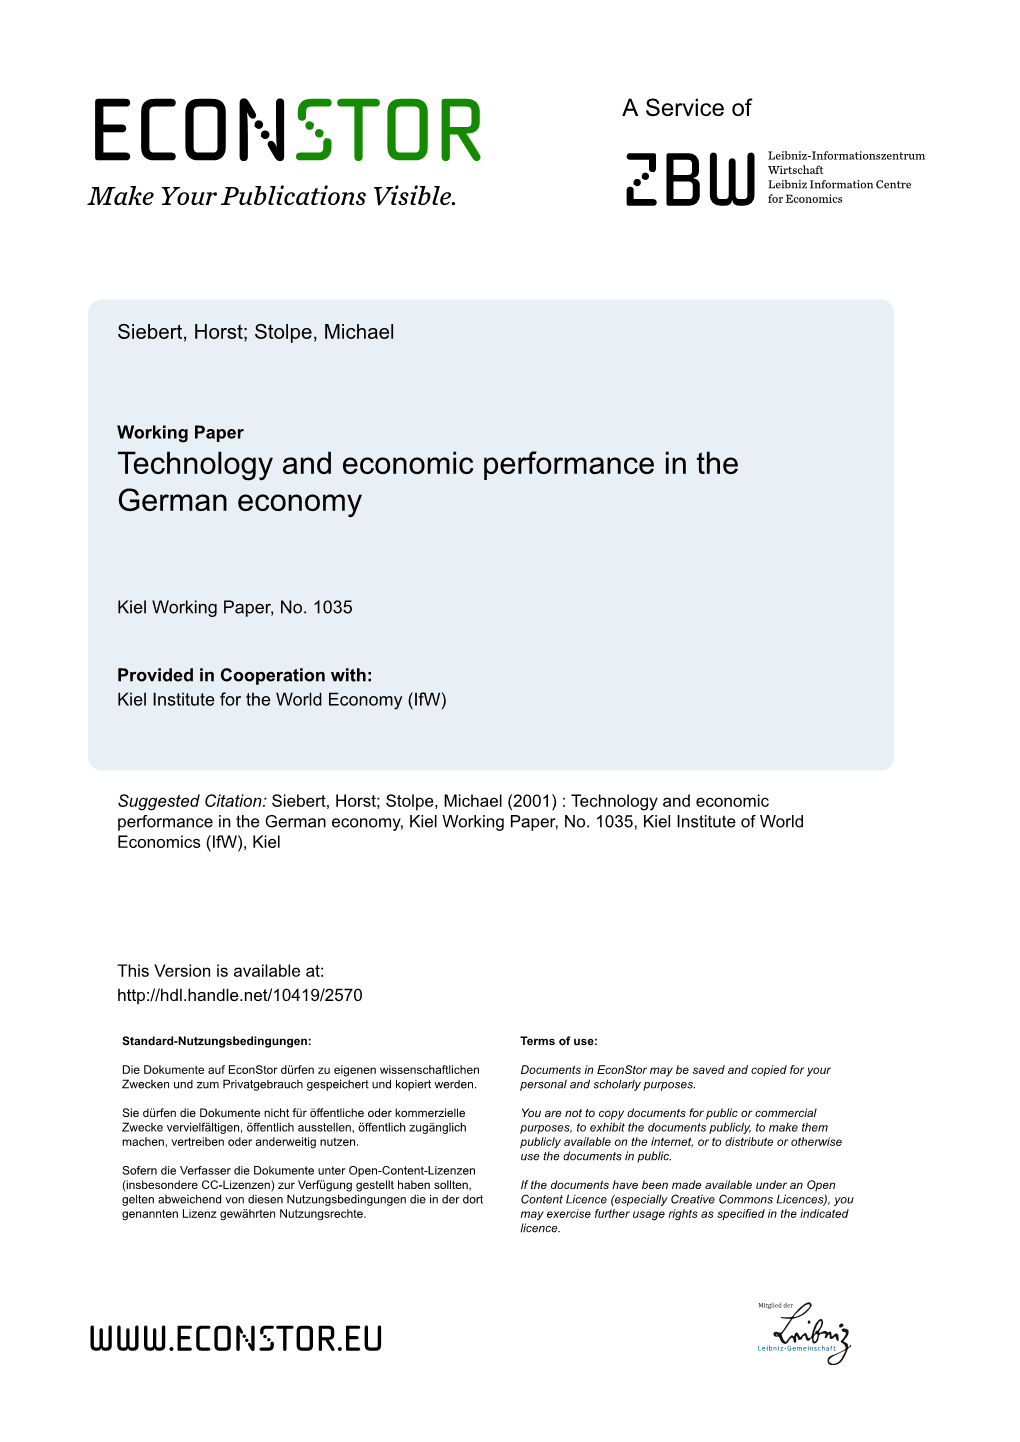 Technology and Economic Performance in the German Economy